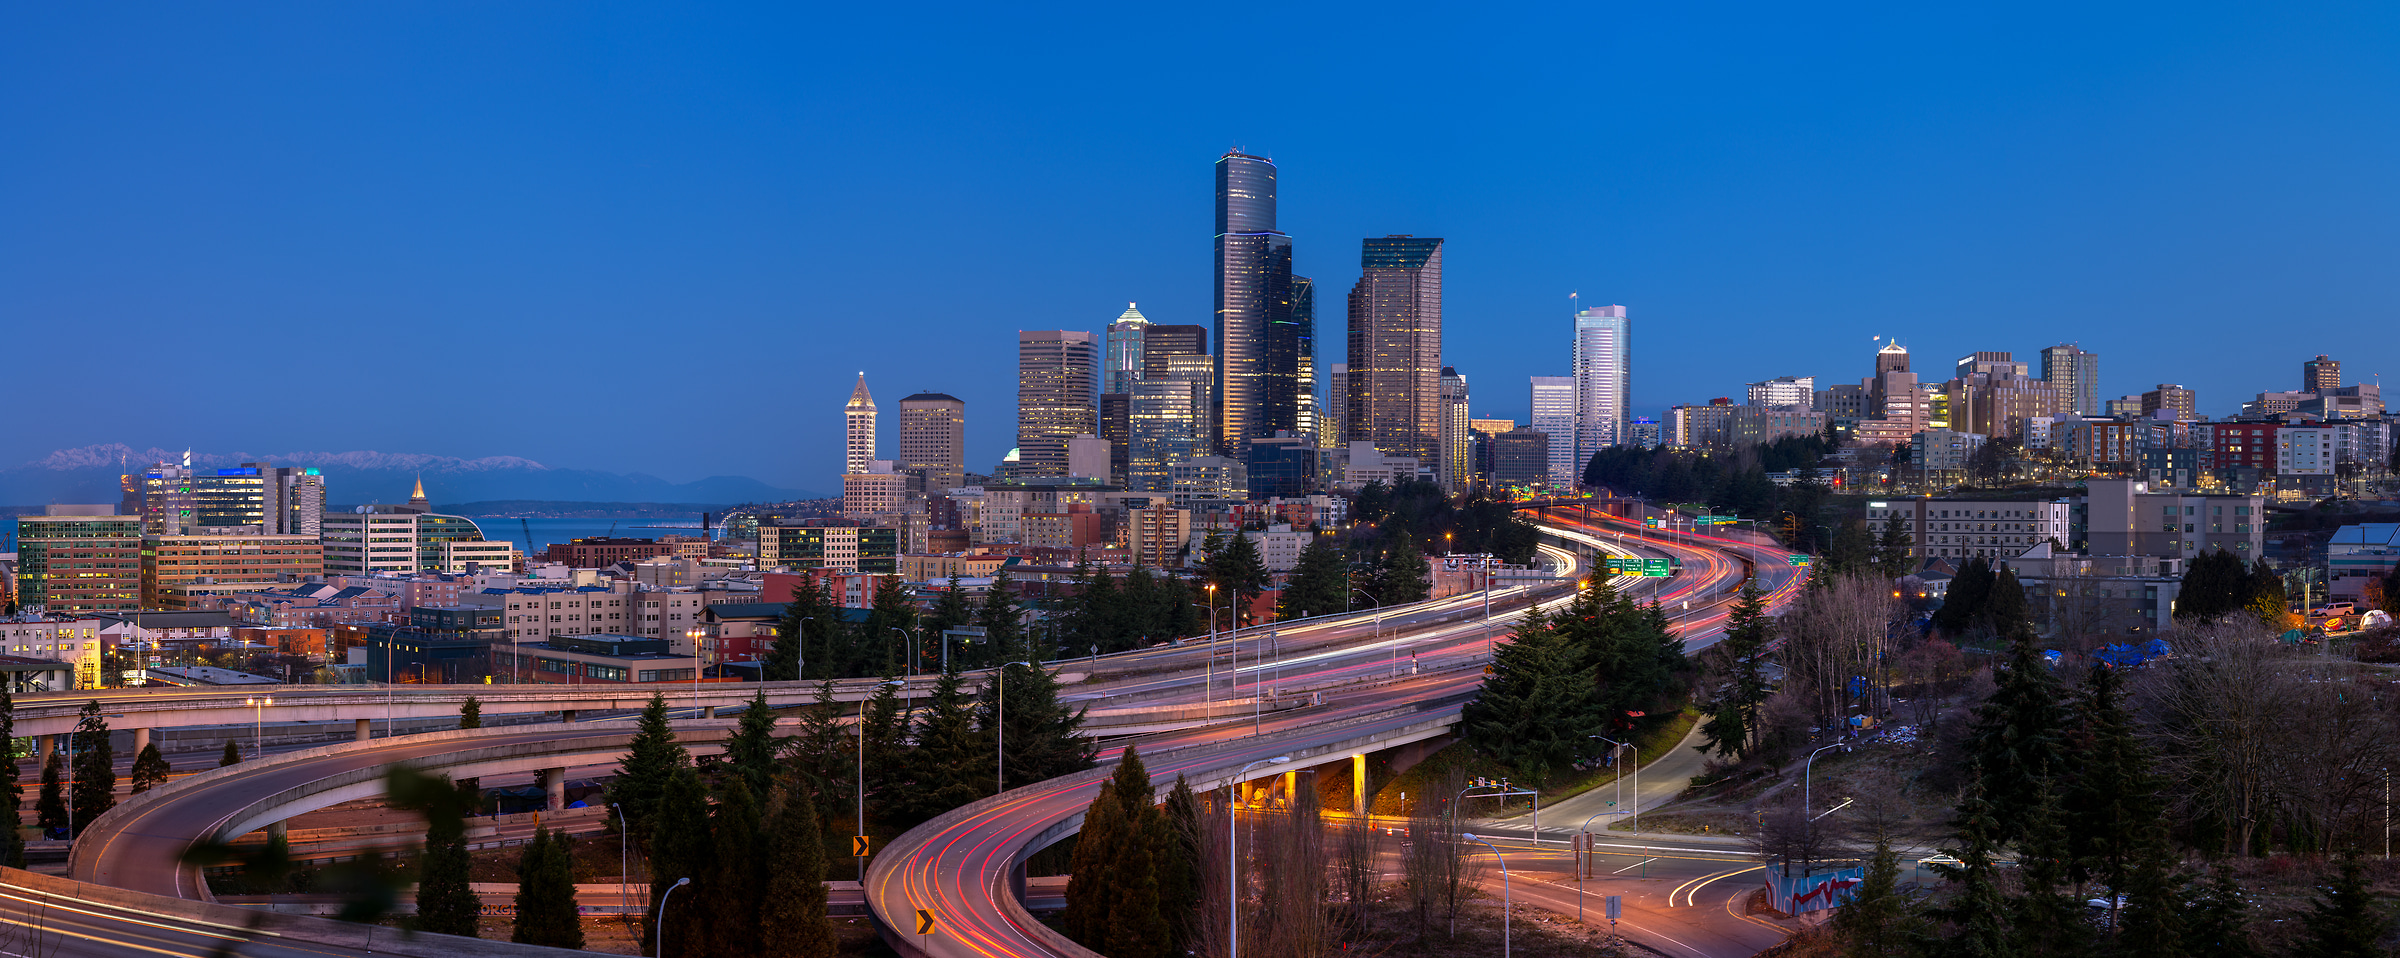 253 megapixels! A very high resolution, large-format VAST photo print of the Seattle skyline in the morning with highways in the foreground; photograph created by Greg Probst in Seattle, Washington.